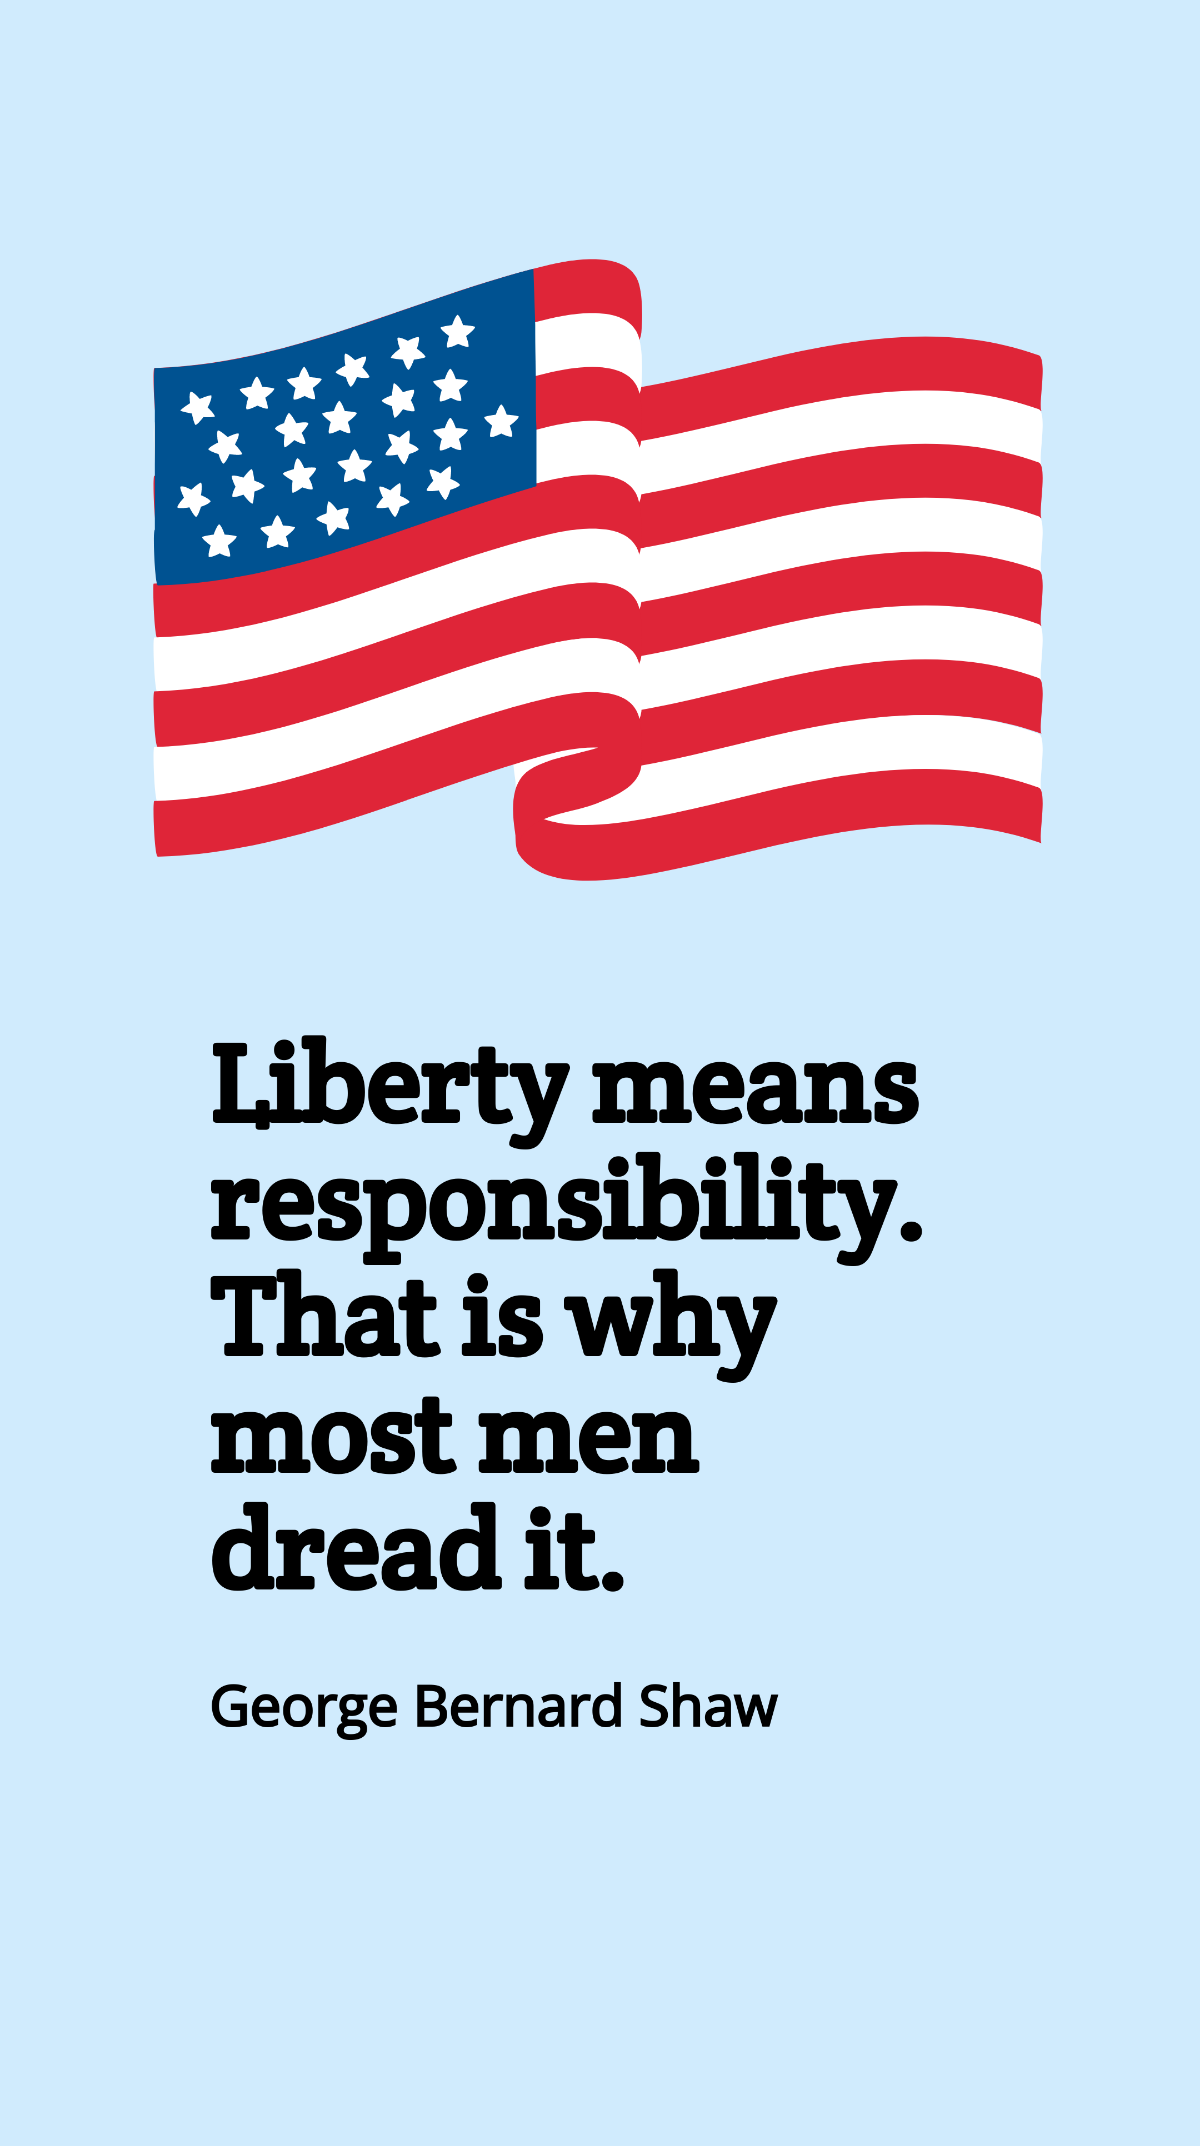 George Bernard Shaw - Liberty means responsibility. That is why most men dread it. Template